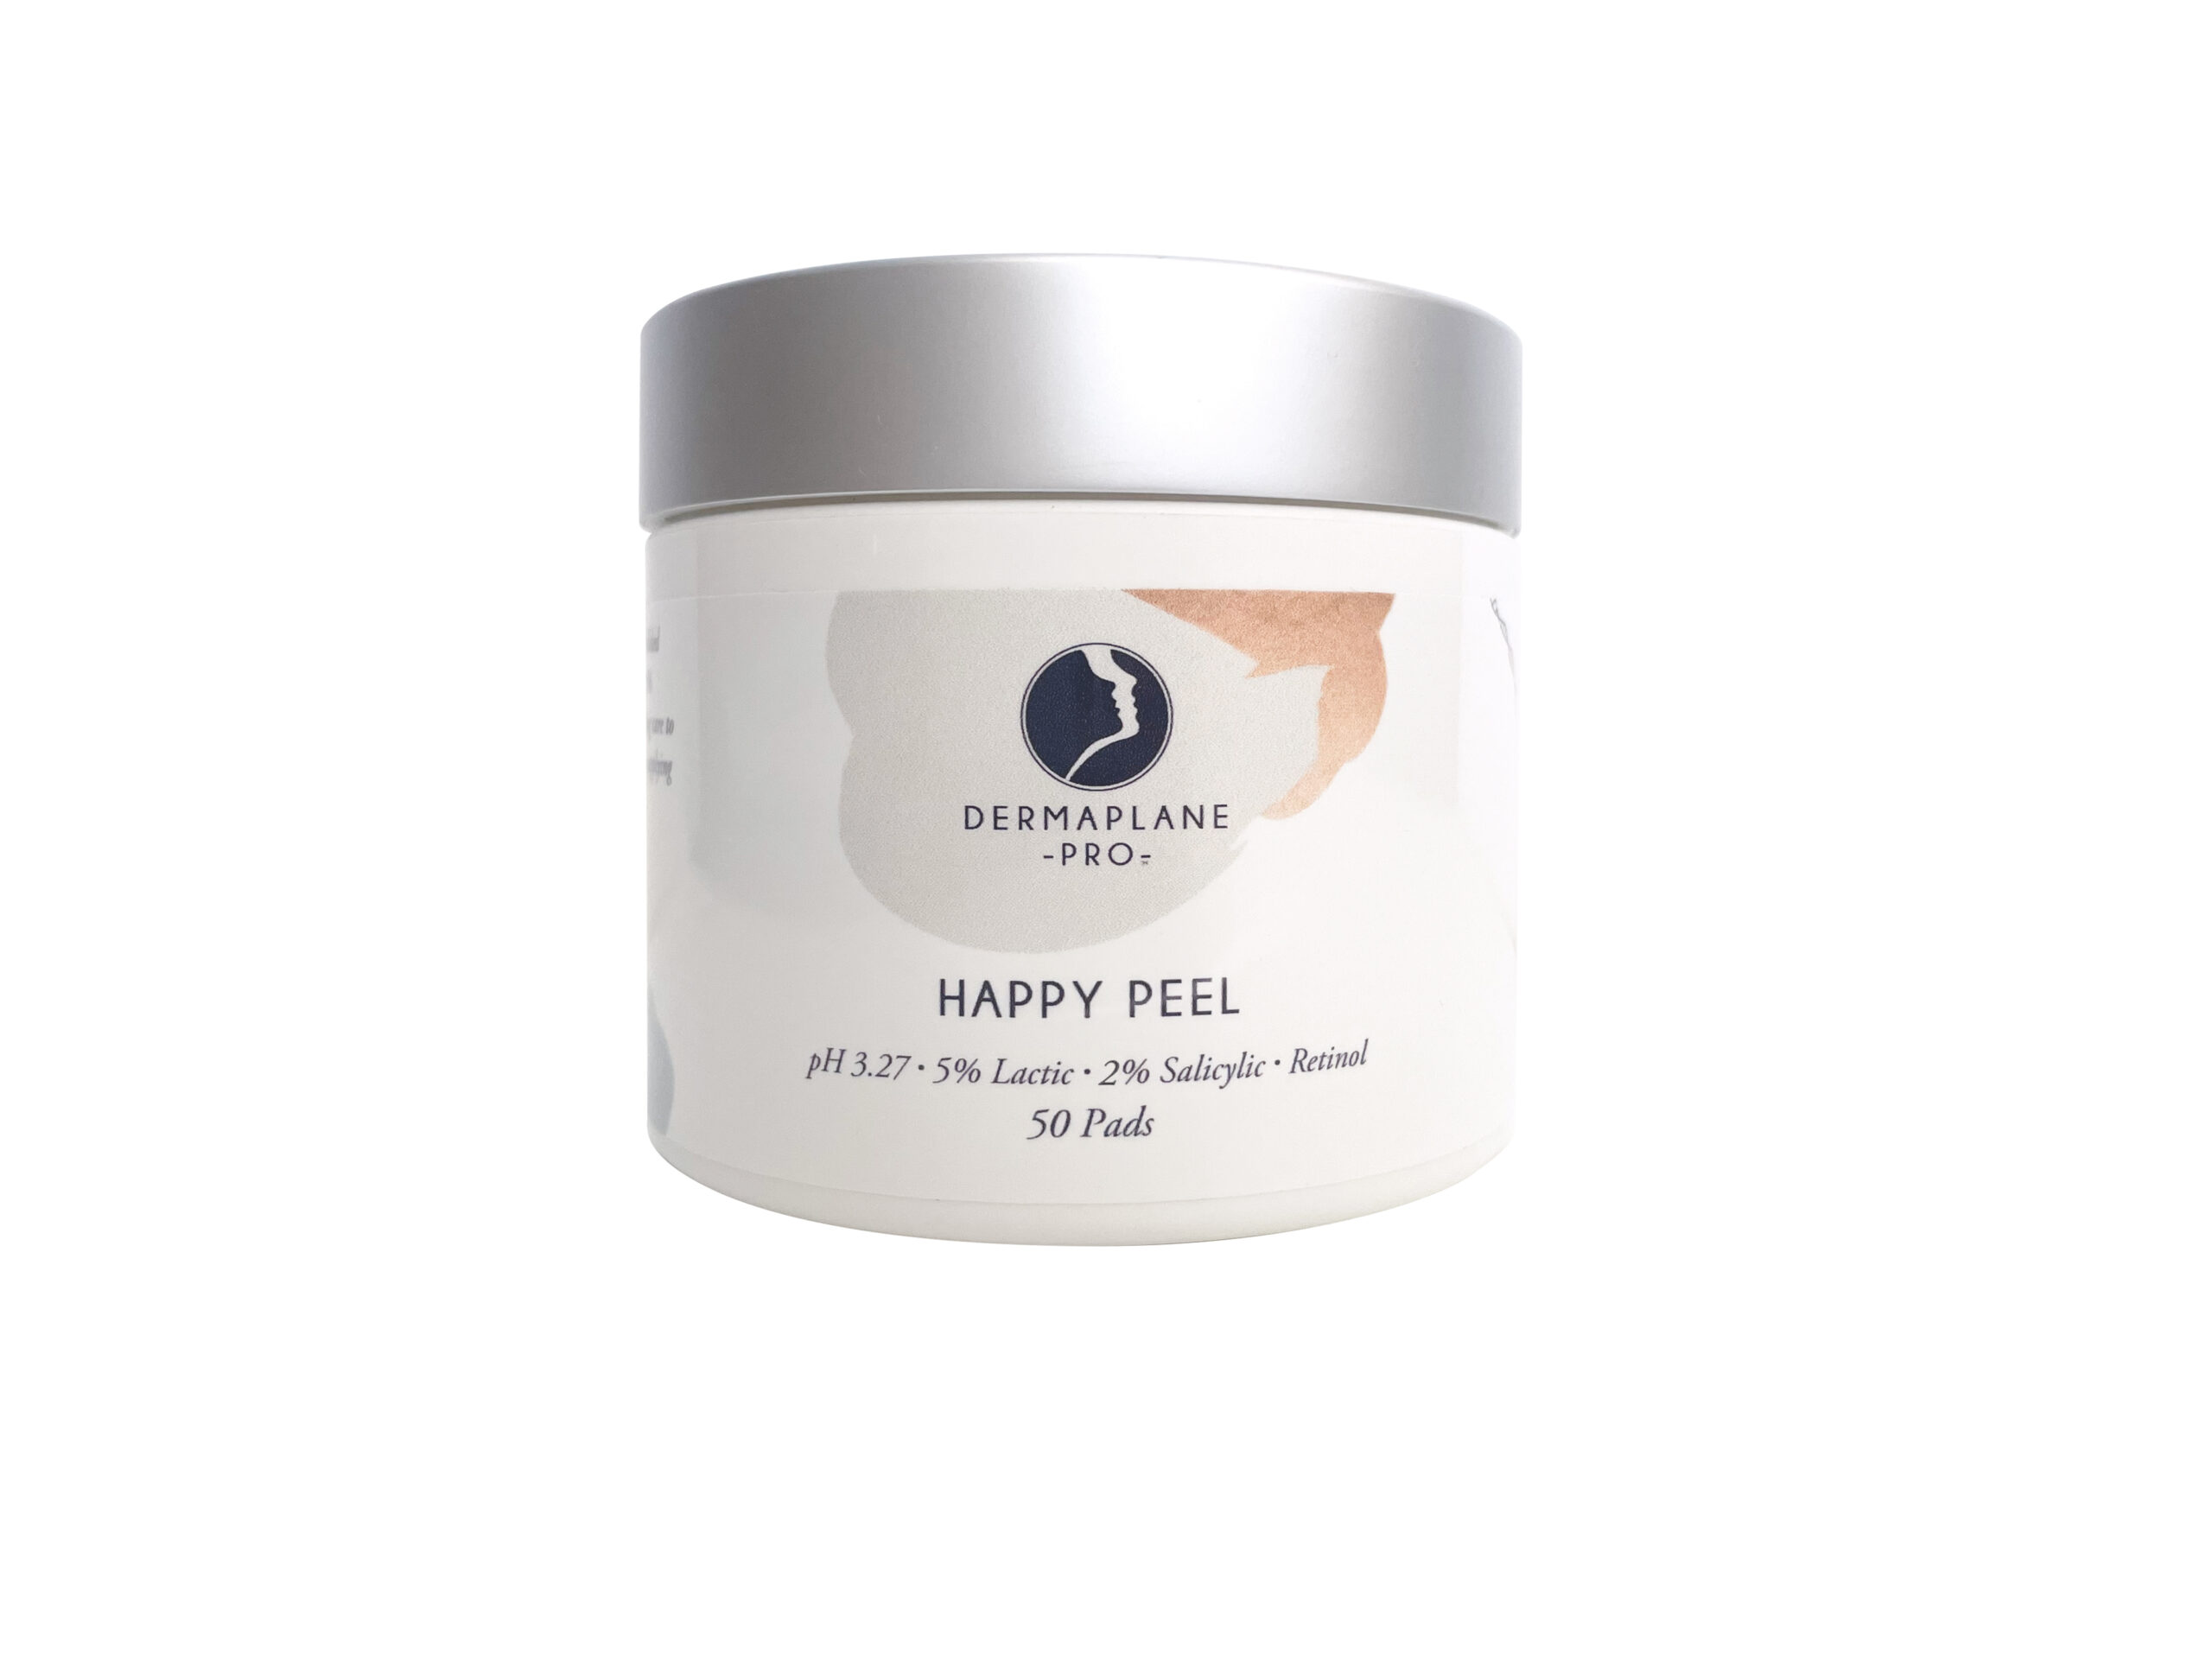 DermaplanePro Happy Peel 50 pads (4 oz). The peel designed to use with dermaplaning. Jar on white background.